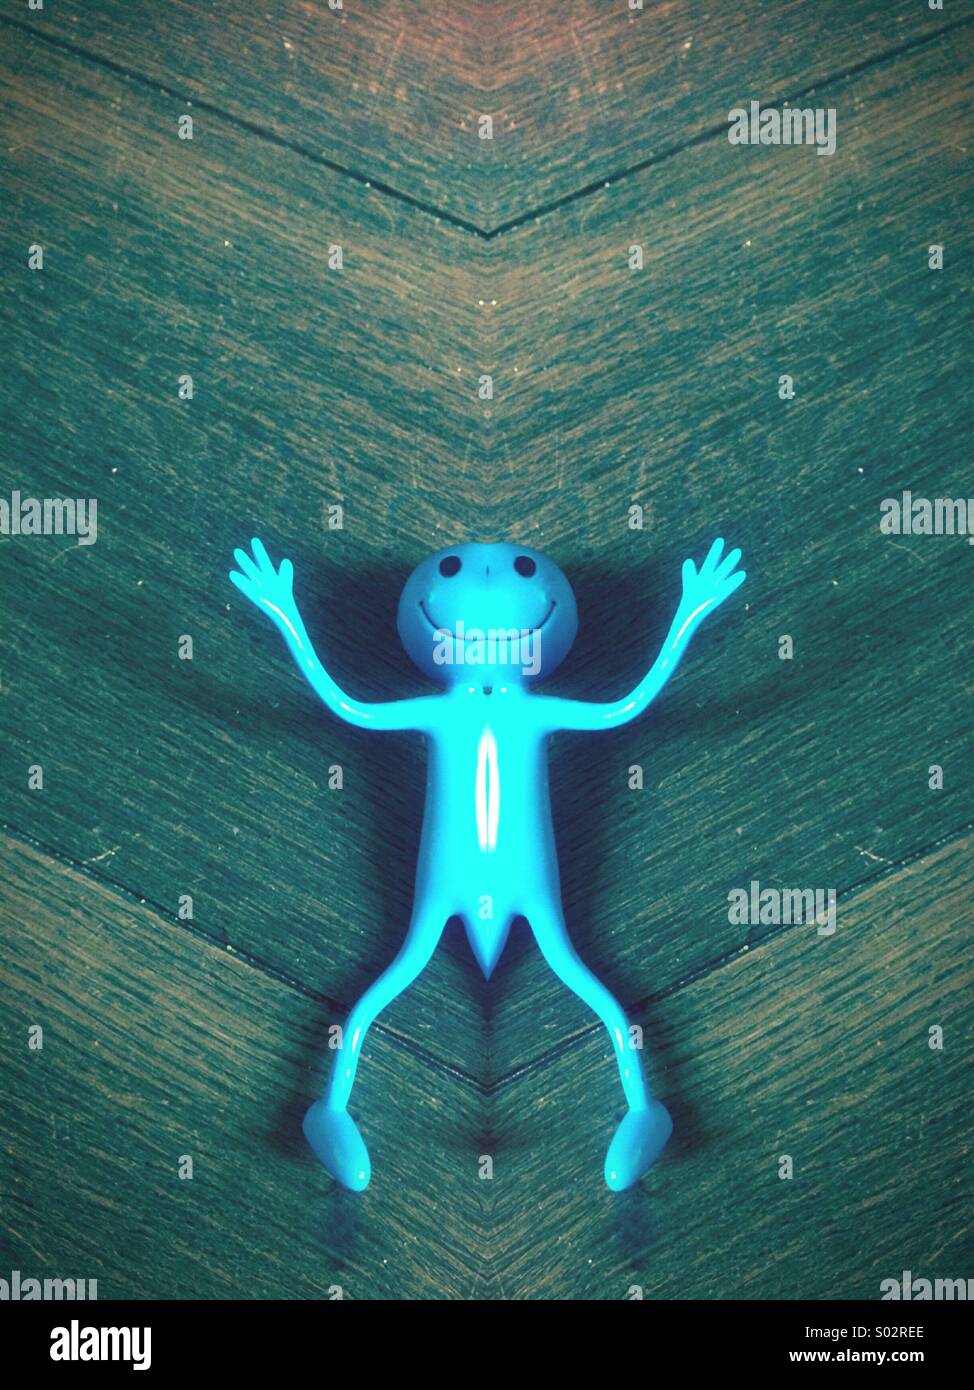 https://c8.alamy.com/comp/S02REE/smiley-mirrored-blue-alien-toy-lying-on-a-wooden-floor-S02REE.jpg